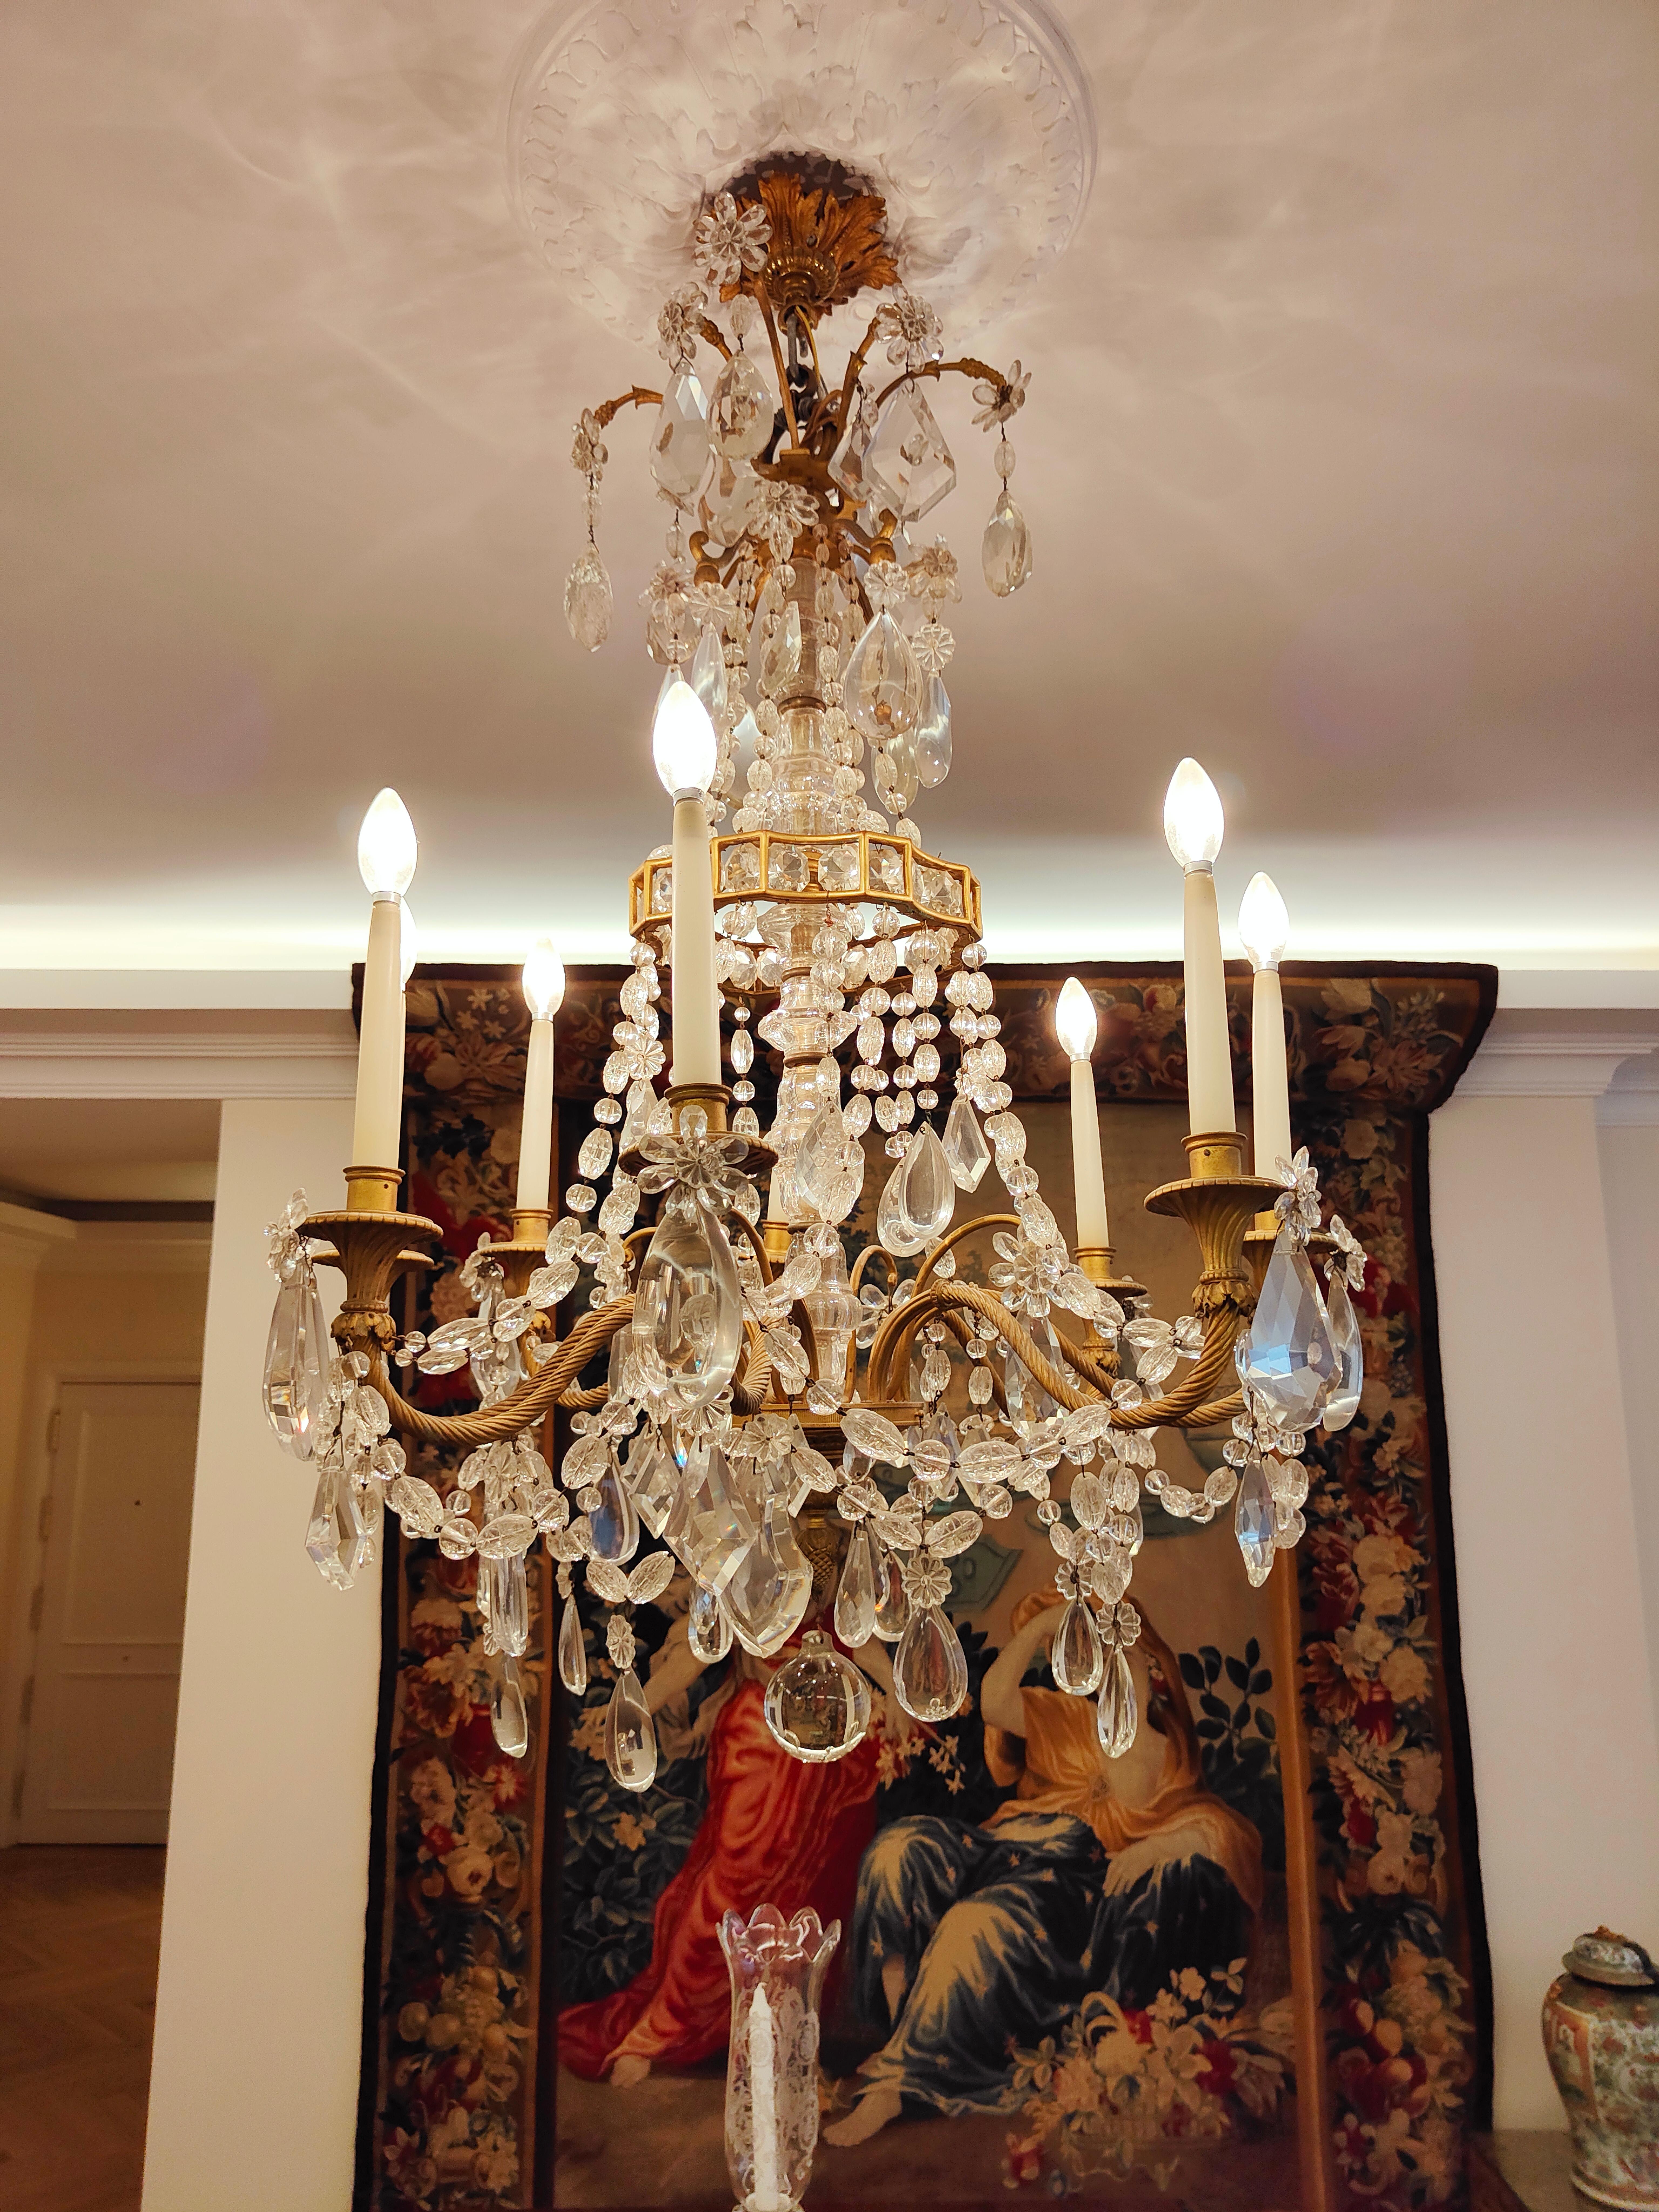 Large French chandelier in Gilt bronze and faceted glass from the XIX
Large French chandelier in Gilt bronze and faceted glass from the XIX Century, Measurements: 120 height X 90 cm in diameter.